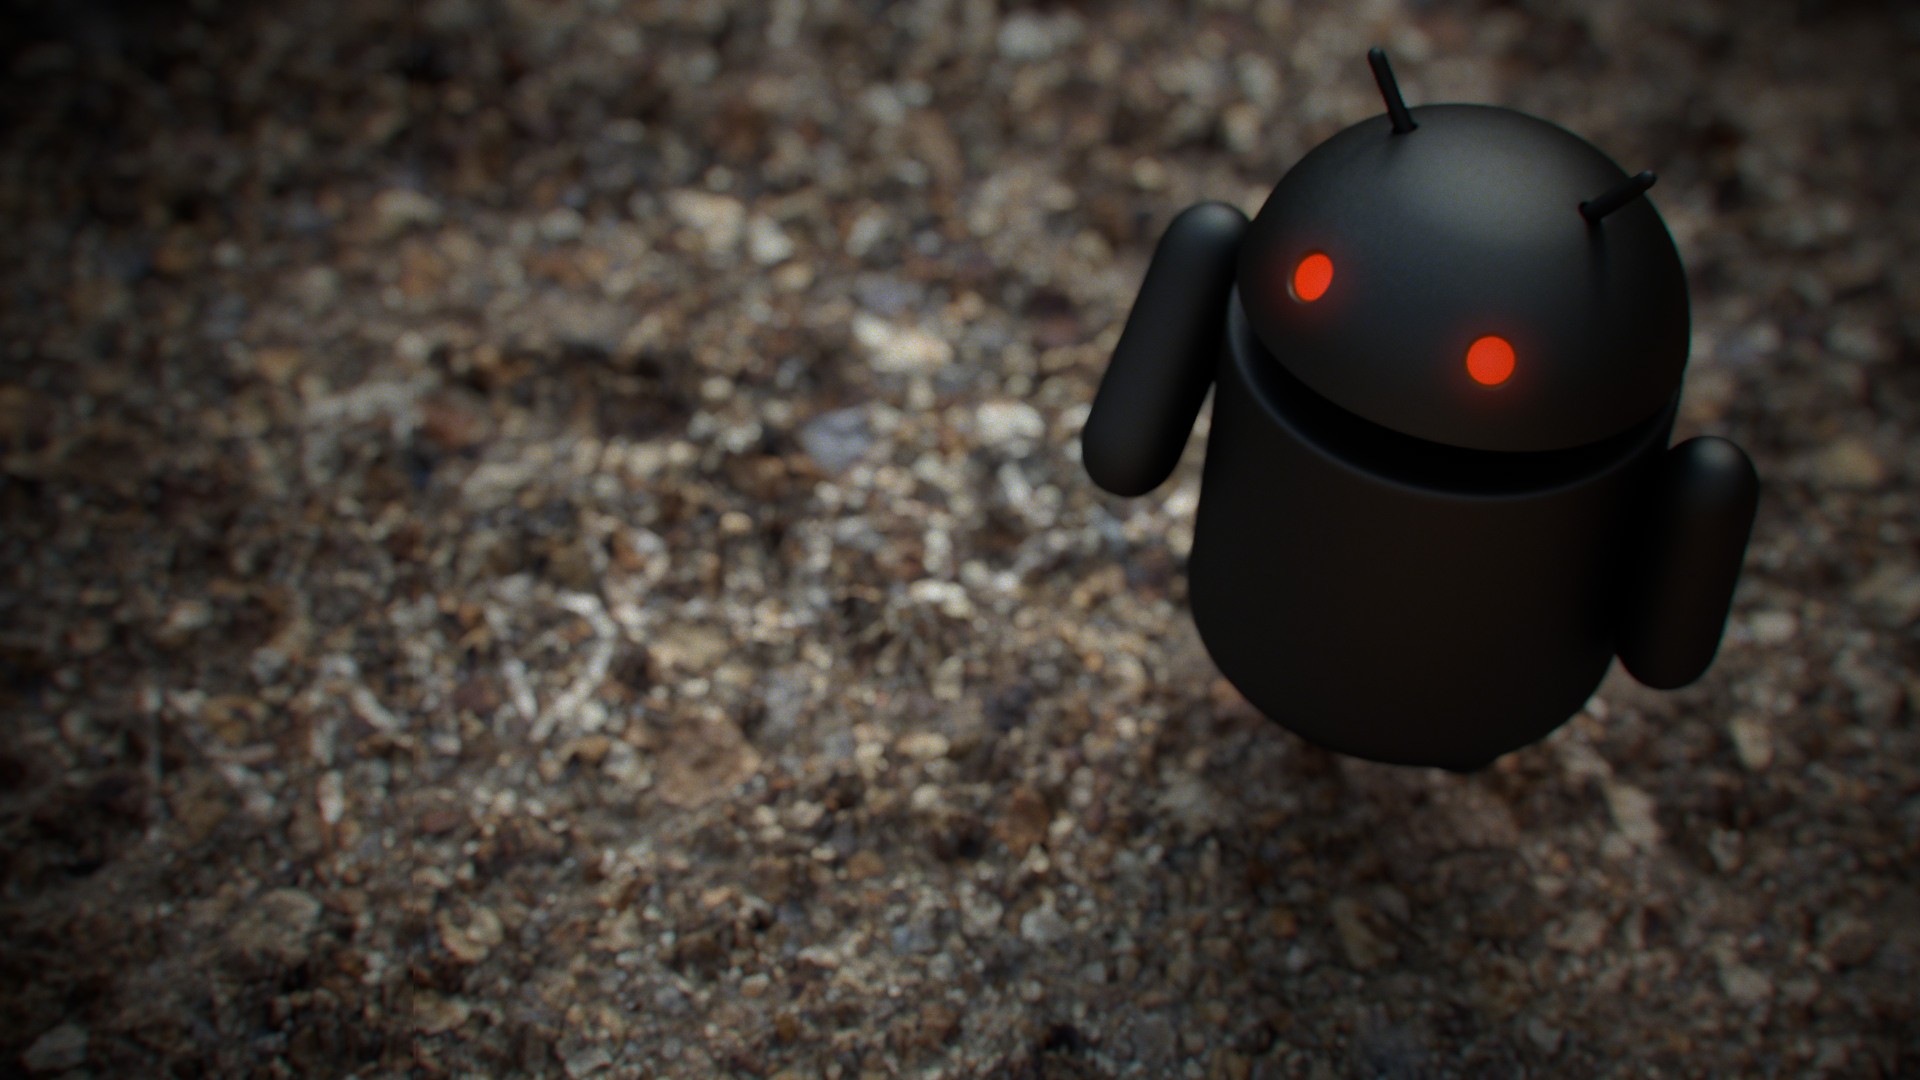 Robot Hd Wallpaper For Android